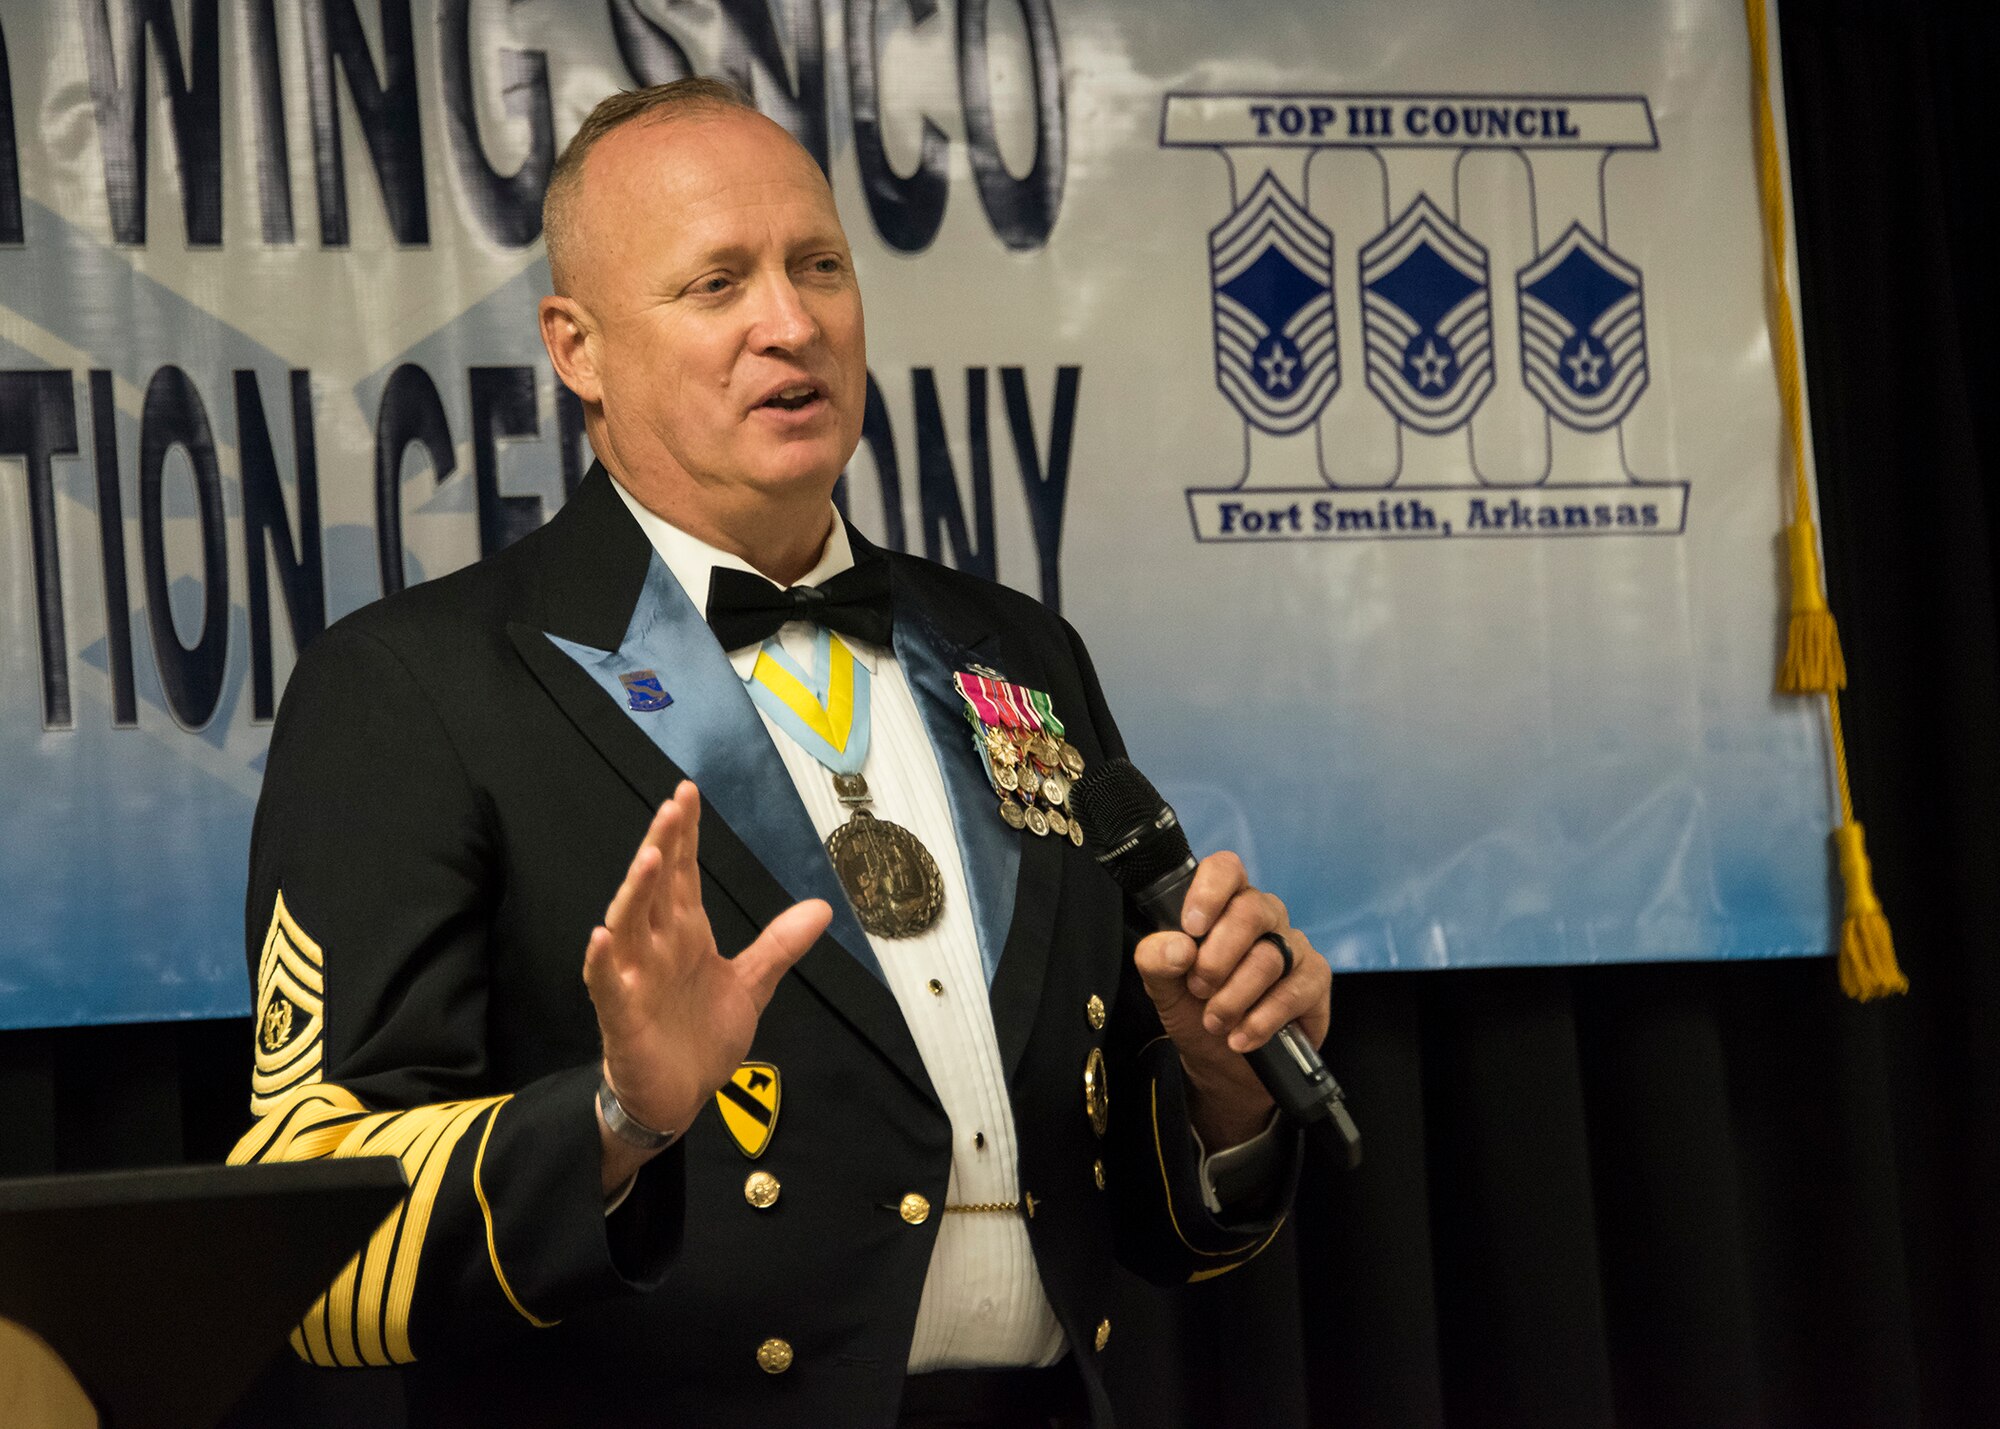 Arkansas State Senior Enlisted Advisor Command Sergeant Steven Veazey delivers remarks during the wing's inaugural Senior Non-commissioned Officer Induction Ceremony, held at Ebbing Air National Guard Base, Ark., June 2, 2018. The wing celebrated the accomplishments of its newest senior NCOs during the evening's event. (U.S. Air National Guard photo by Tech. Sgt. John E. Hillier)